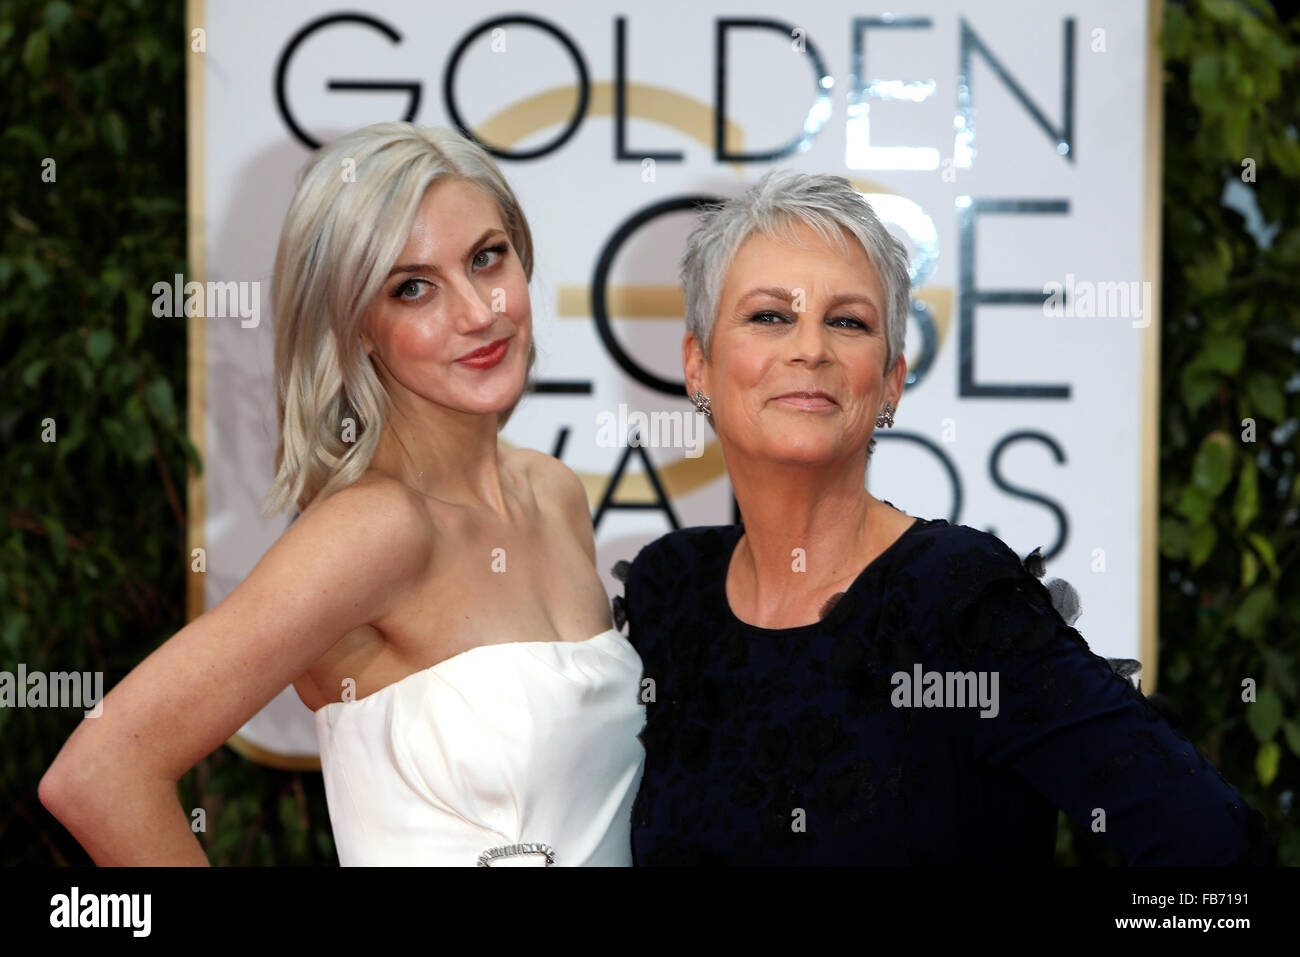 Beverly Hills, California, USA. 10th Jan, 2016. Actress Jamie Lee Curtis (R) and daughter Annie Guest arrive at the 73rd Annual Golden Globe Awards at the Beverly Hilton Hotel in Beverly Hills, California, USA, 10 January 2016. Photo: Hubert Boesl/dpa - NO WIRE SERVICE -/dpa/Alamy Live News Stock Photo